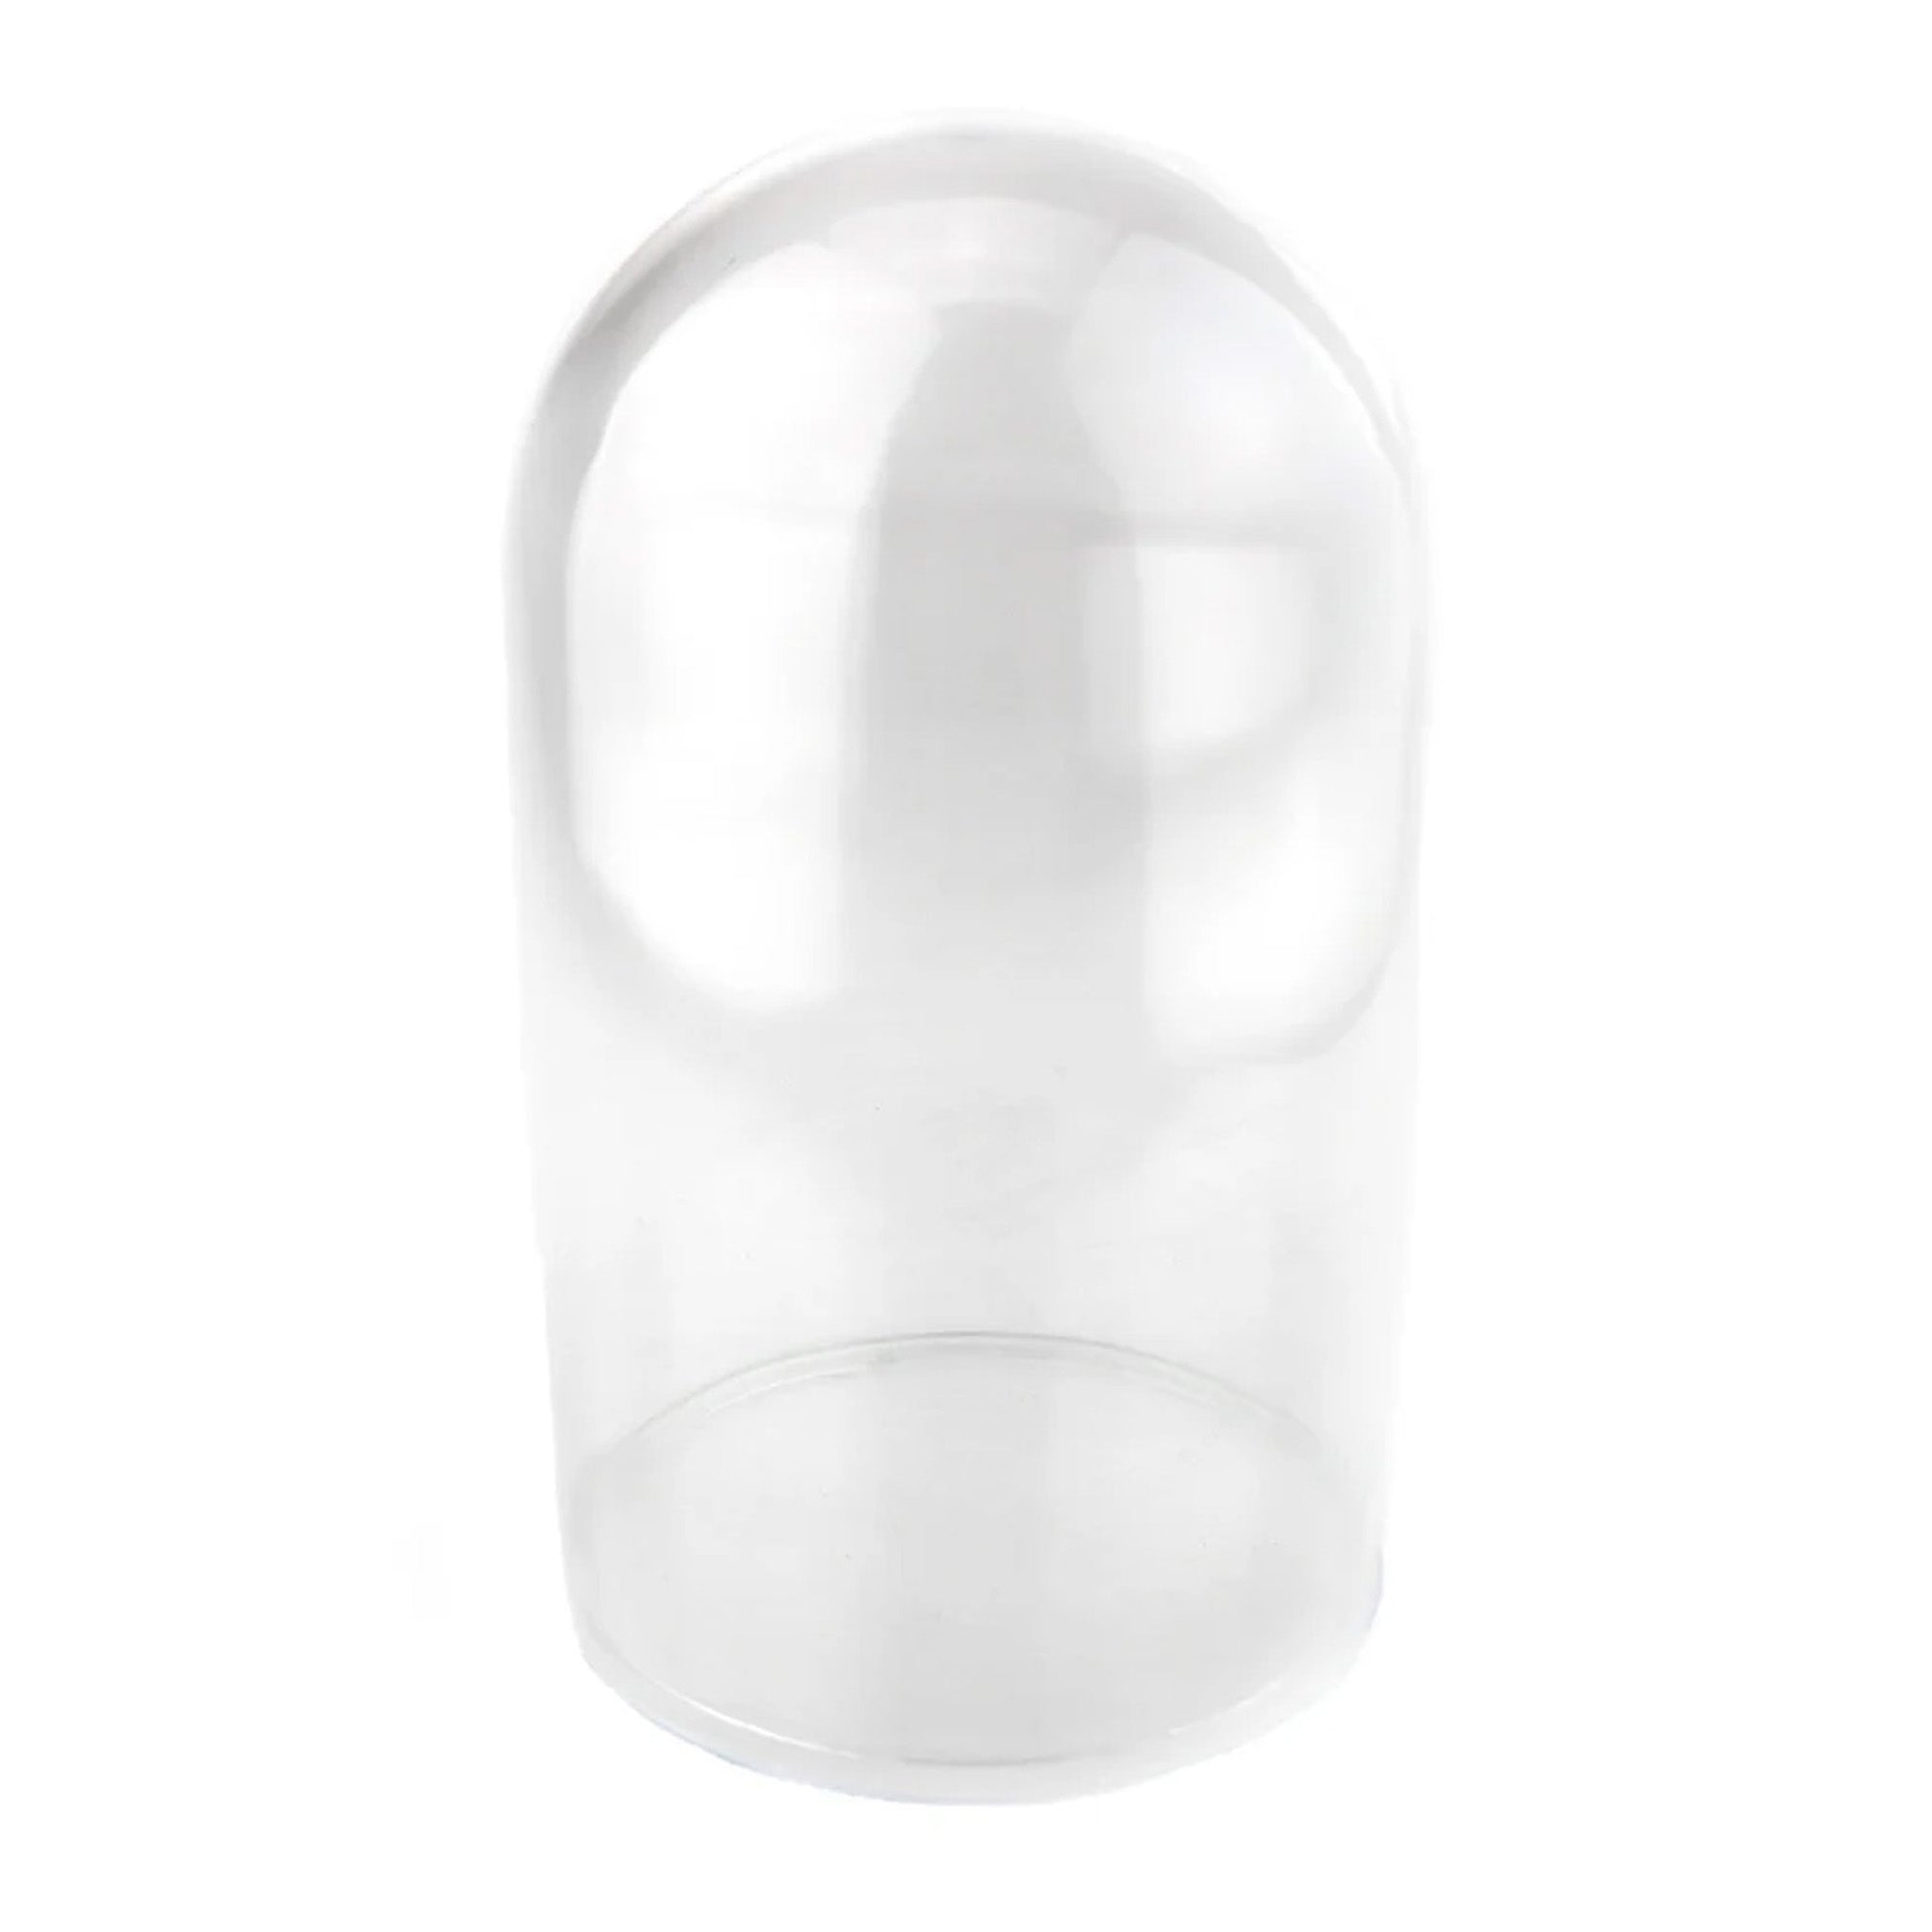 Homeford Plastic Dome Display with Clear Base, 8-1/2-Inch, X-Large